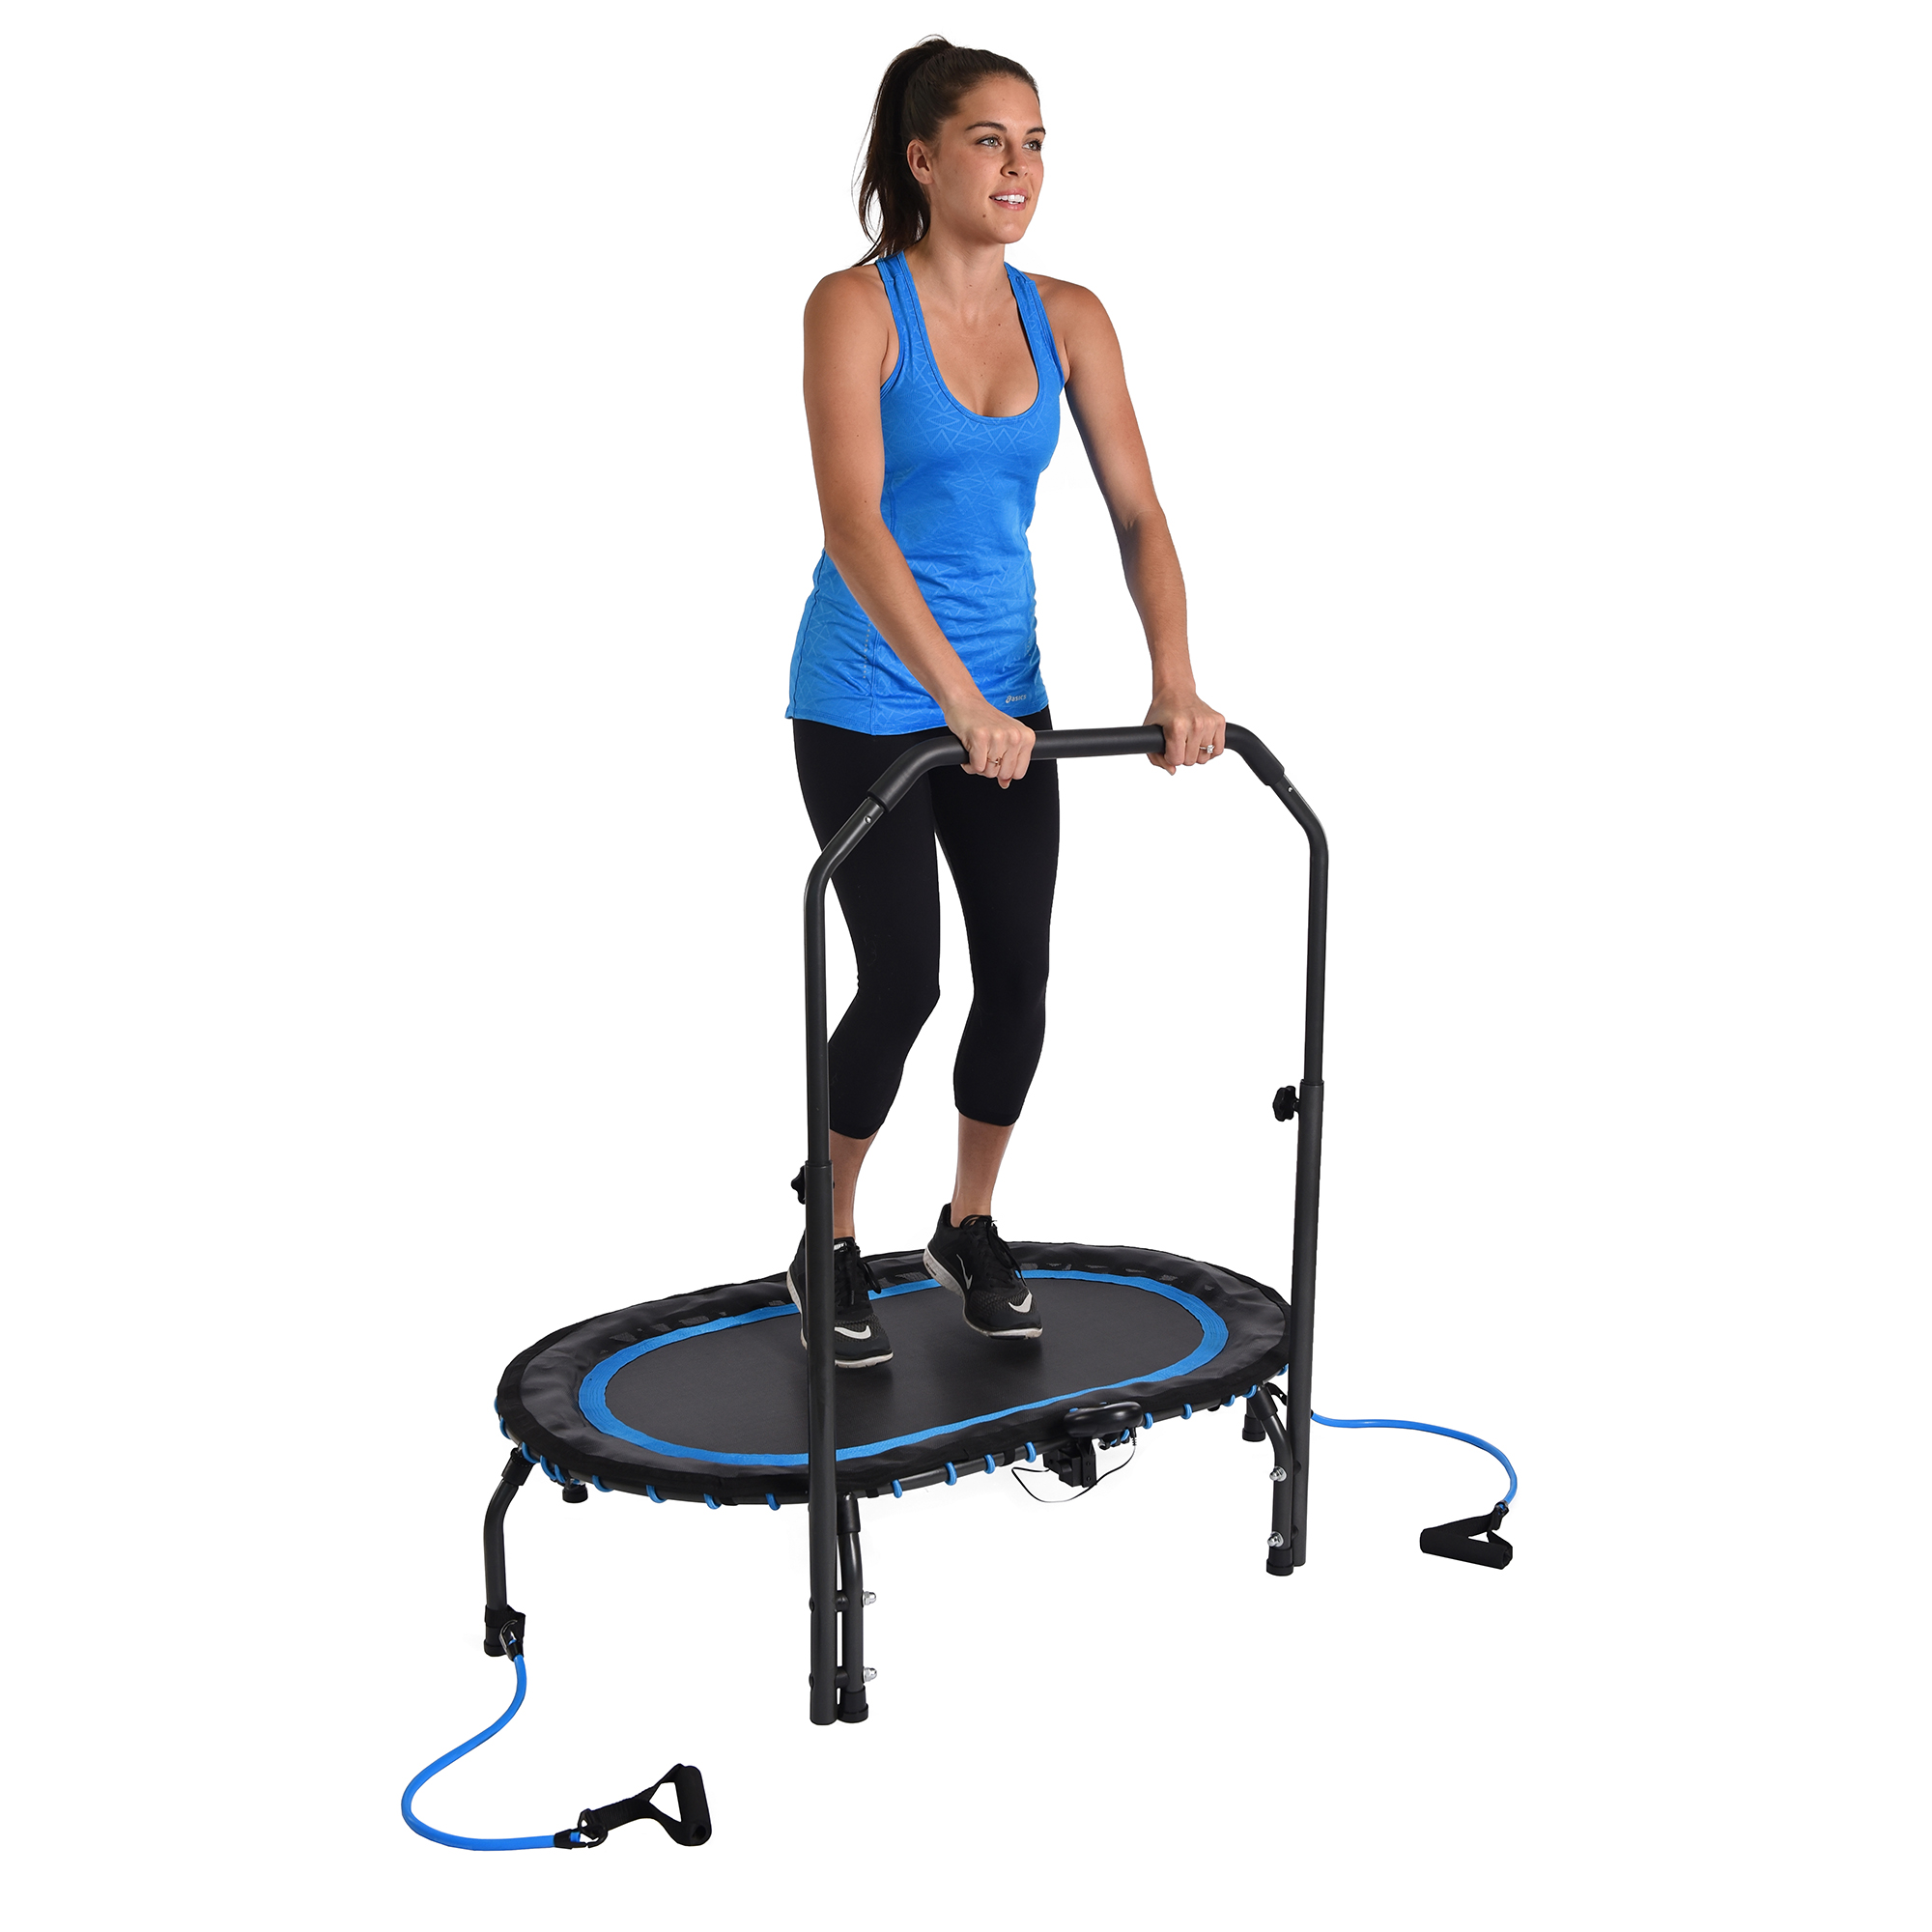 Stamina InTone Oval Fitness Rebounder Trampoline for Cardio with Handlebars - image 3 of 9